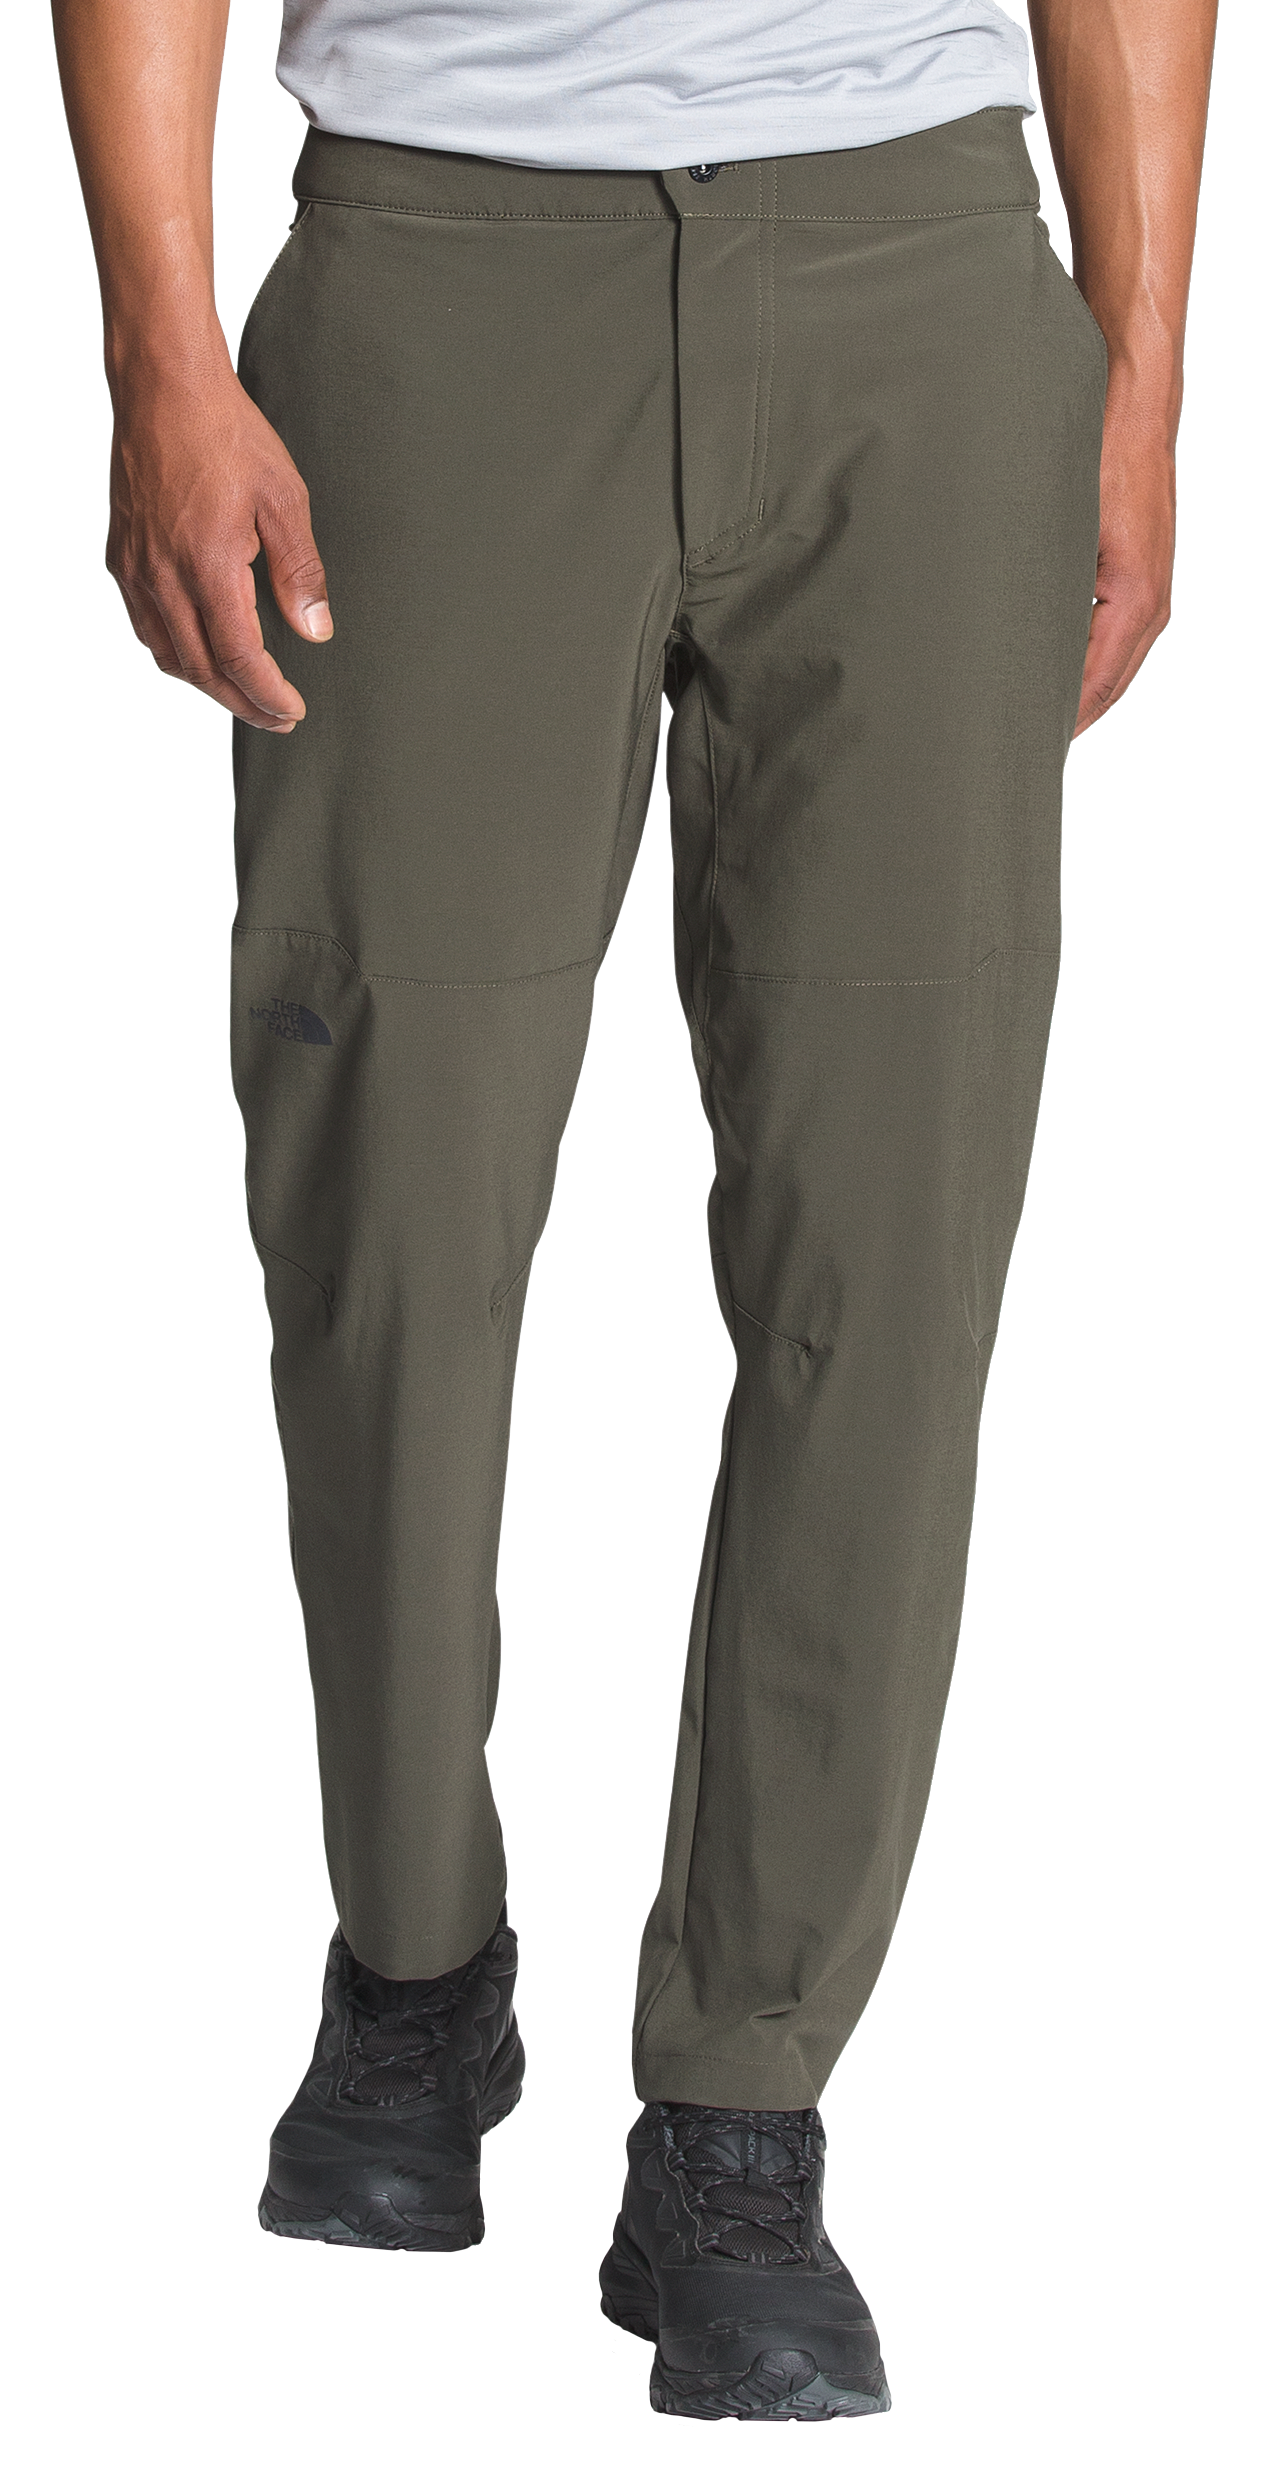 The North Face Paramount Active Pants for Men - New Taupe Green/New Taupe Green - 30 - Long